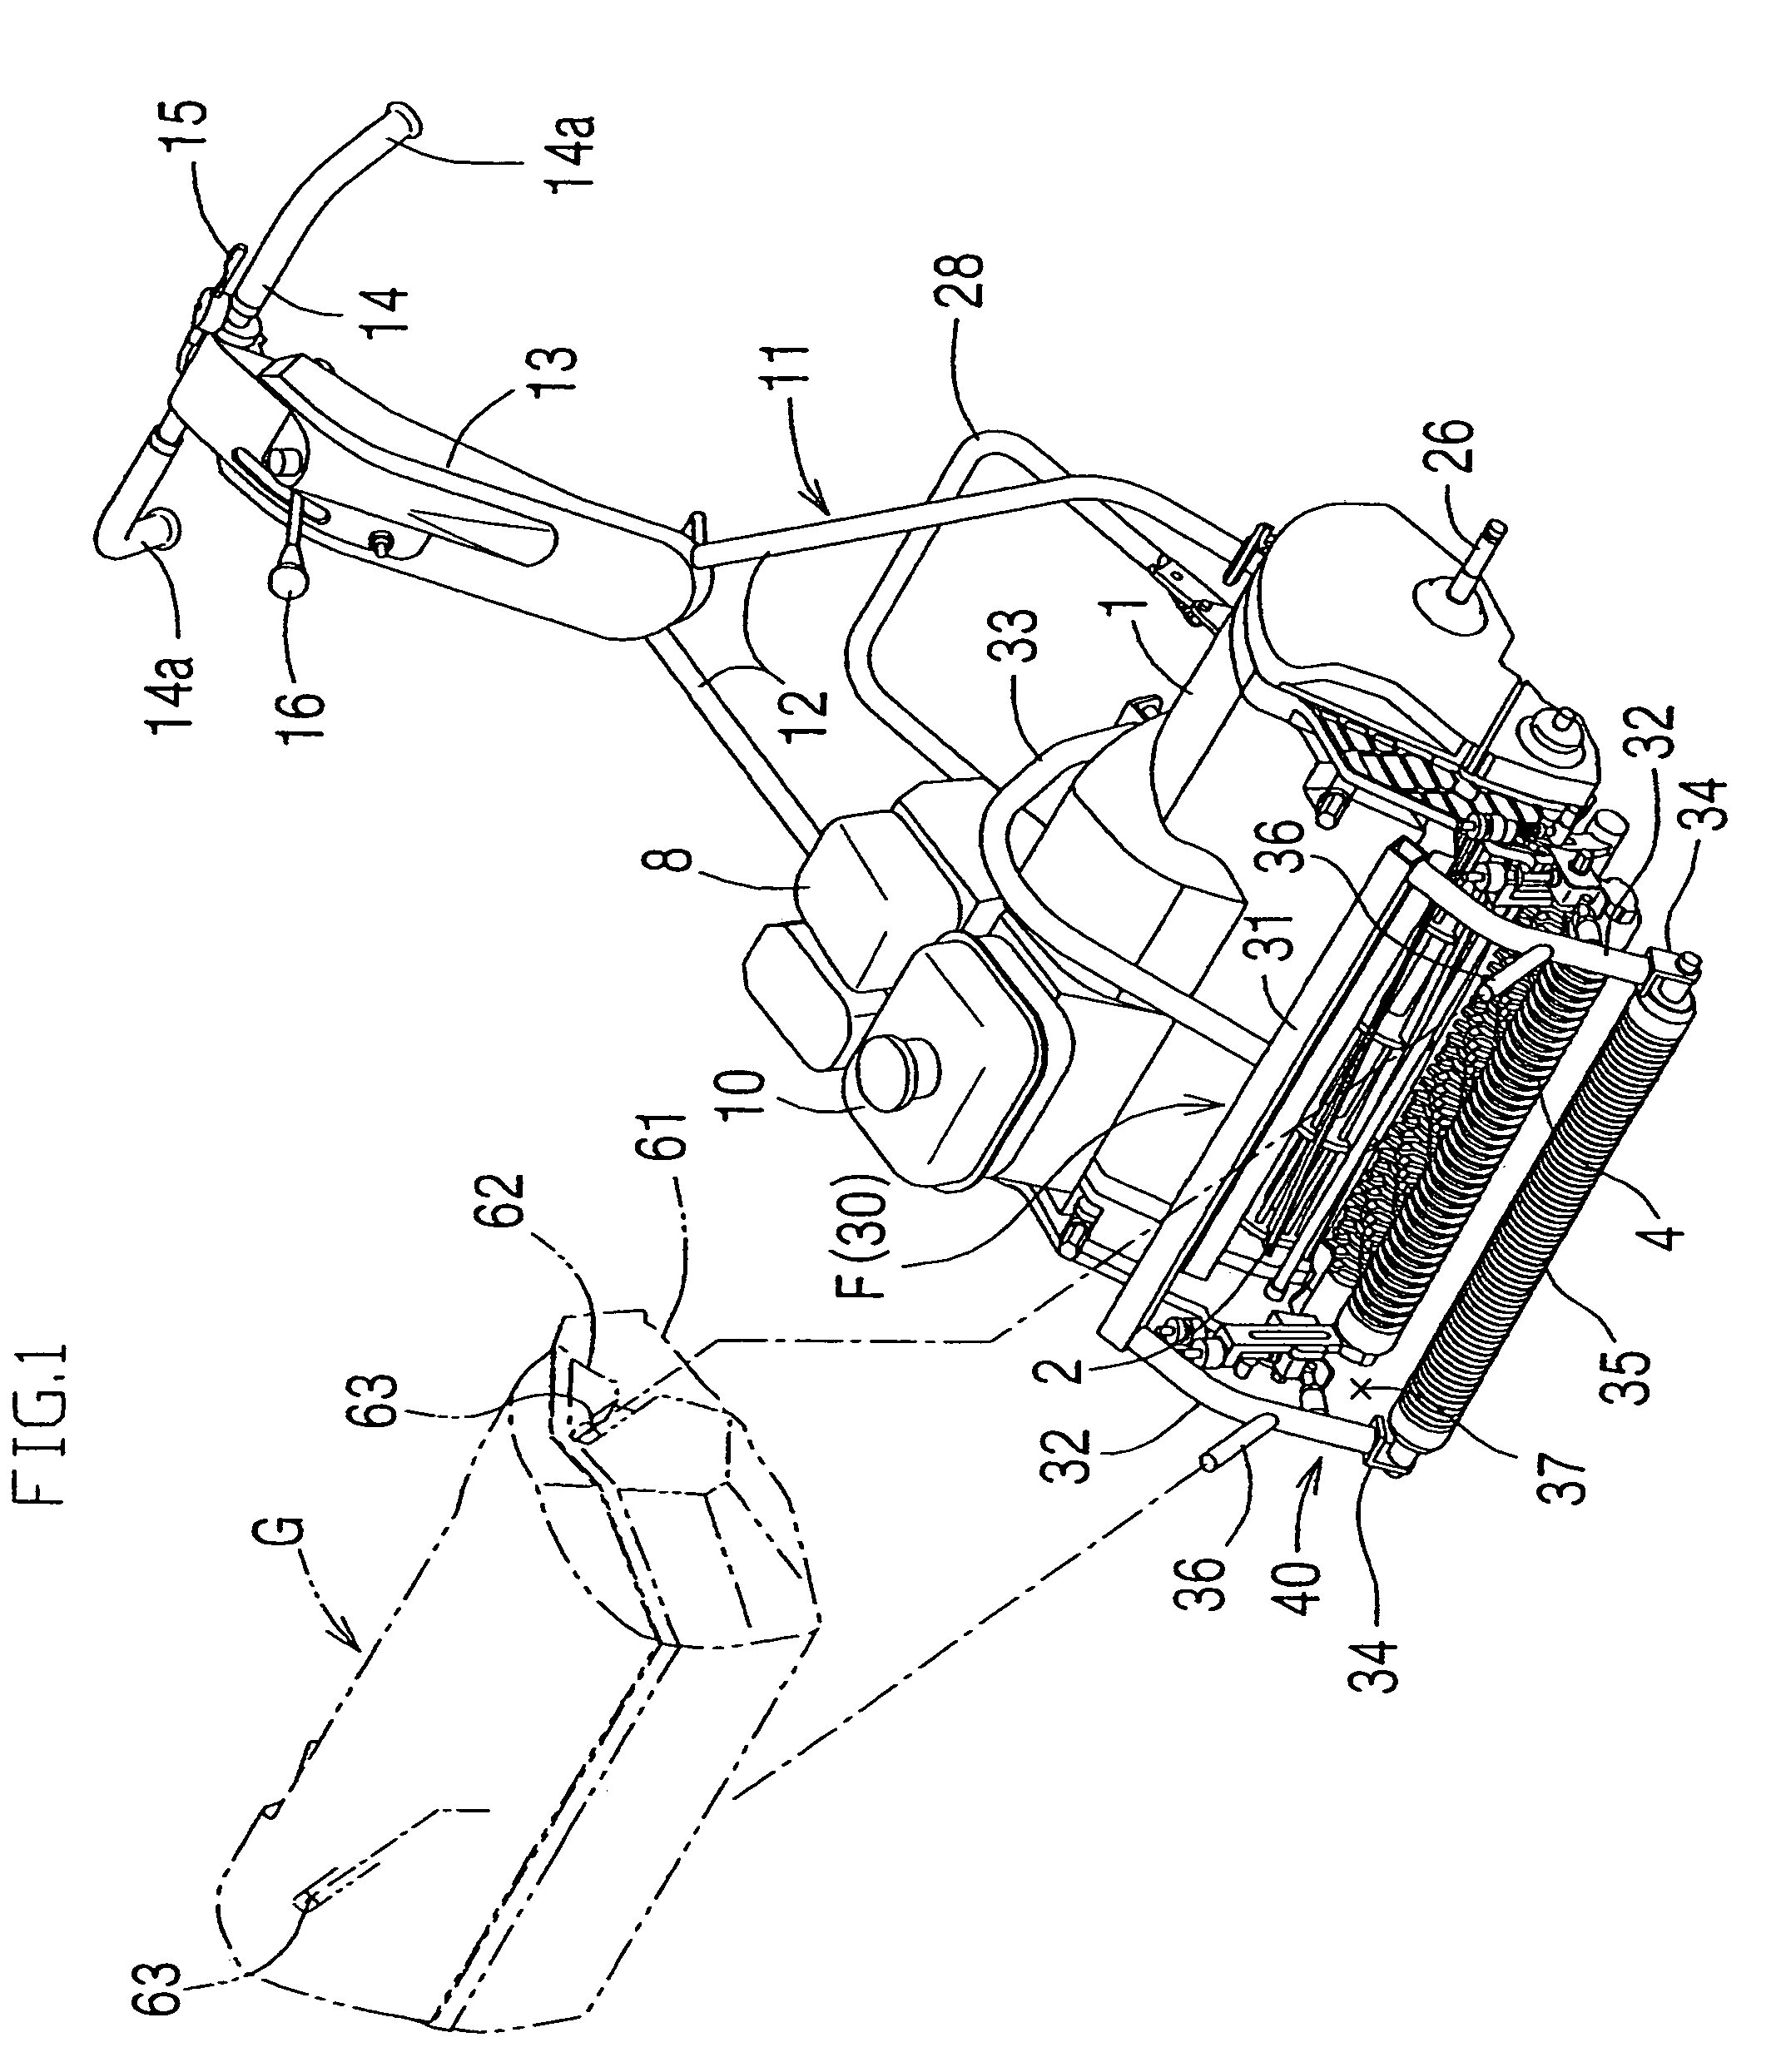 Walk-type lawn mower and catcher frame apparatus